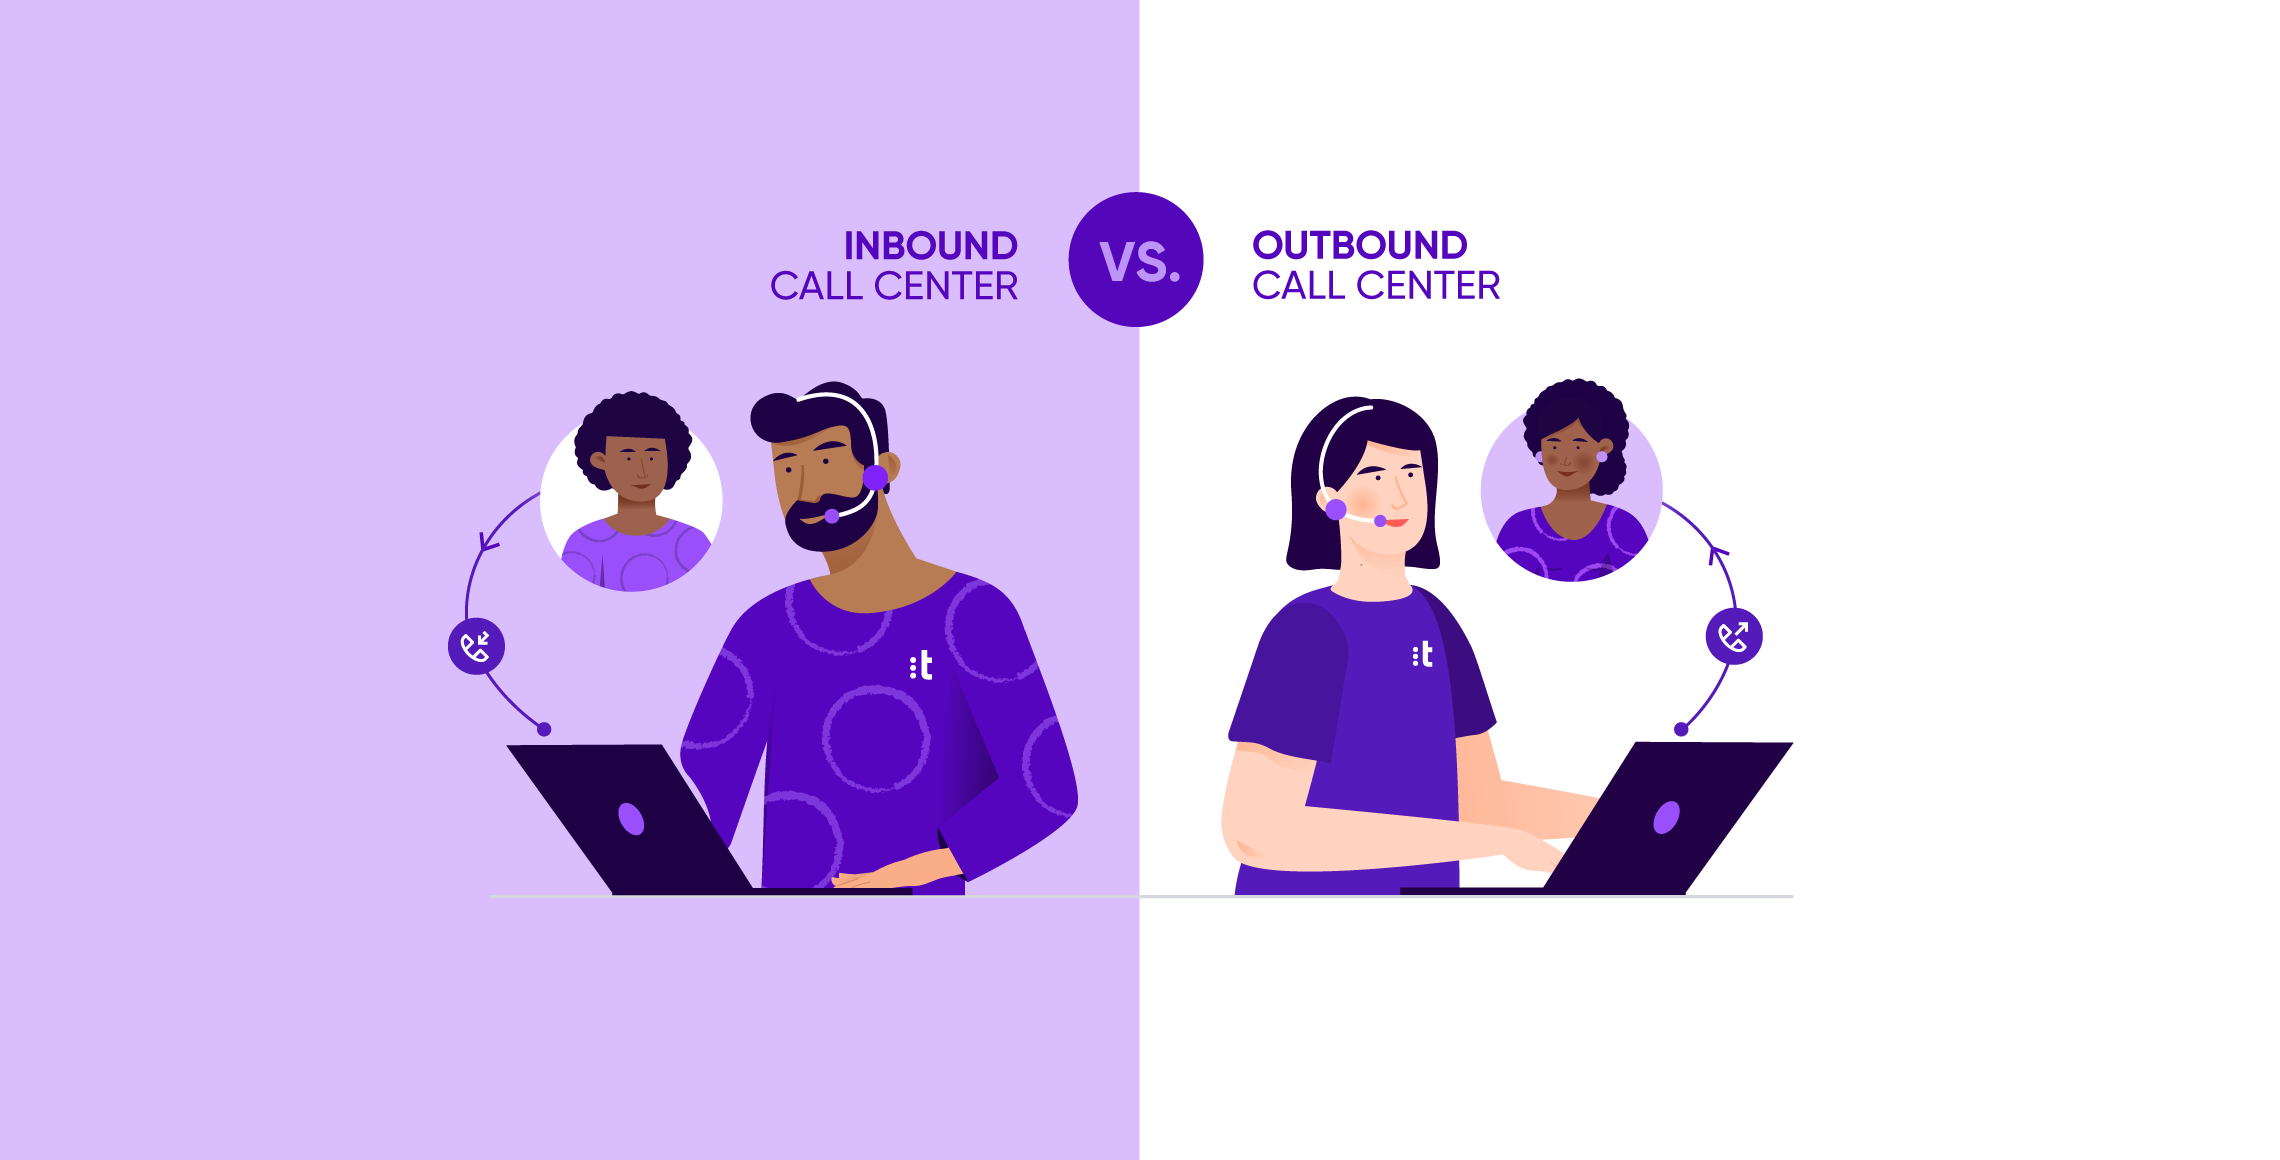 agents using call center software to handle inbound and outbound calls with customers